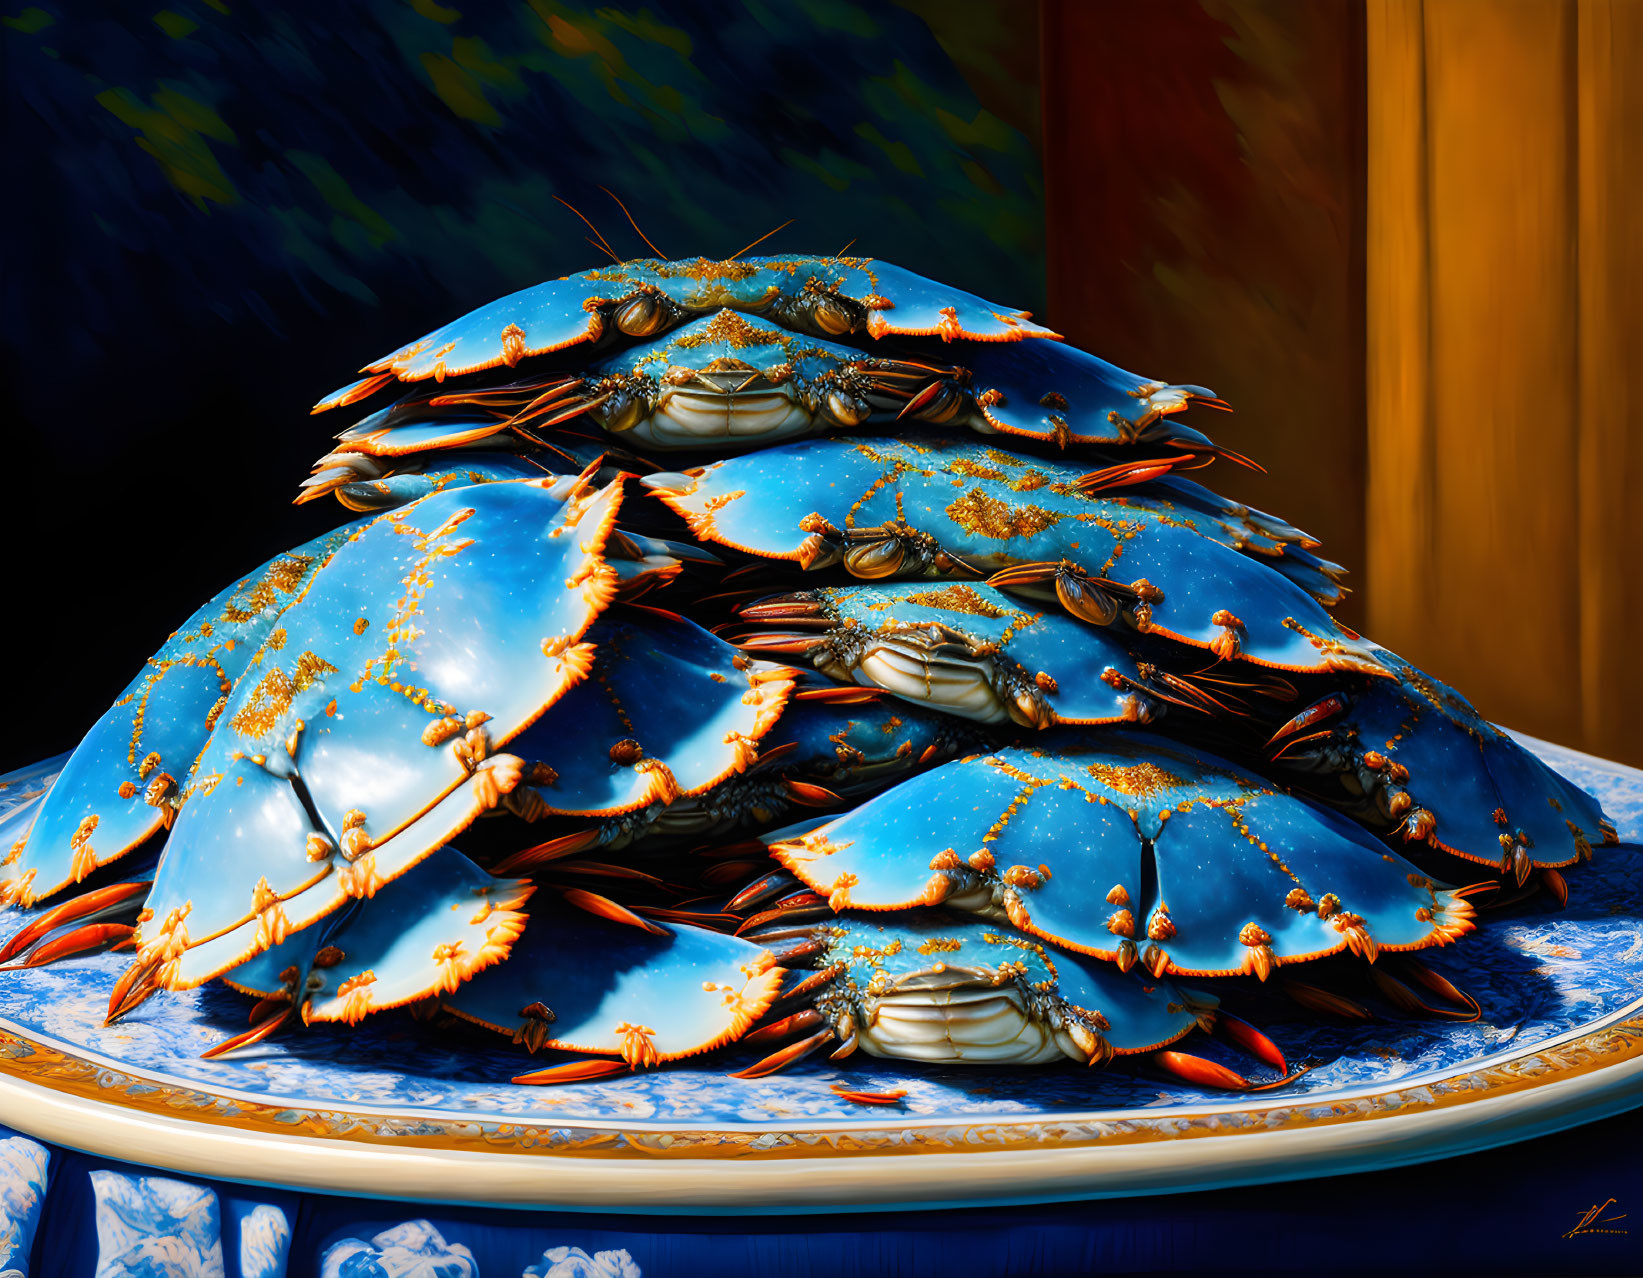 Vivid blue crabs with orange accents on blue and white plate